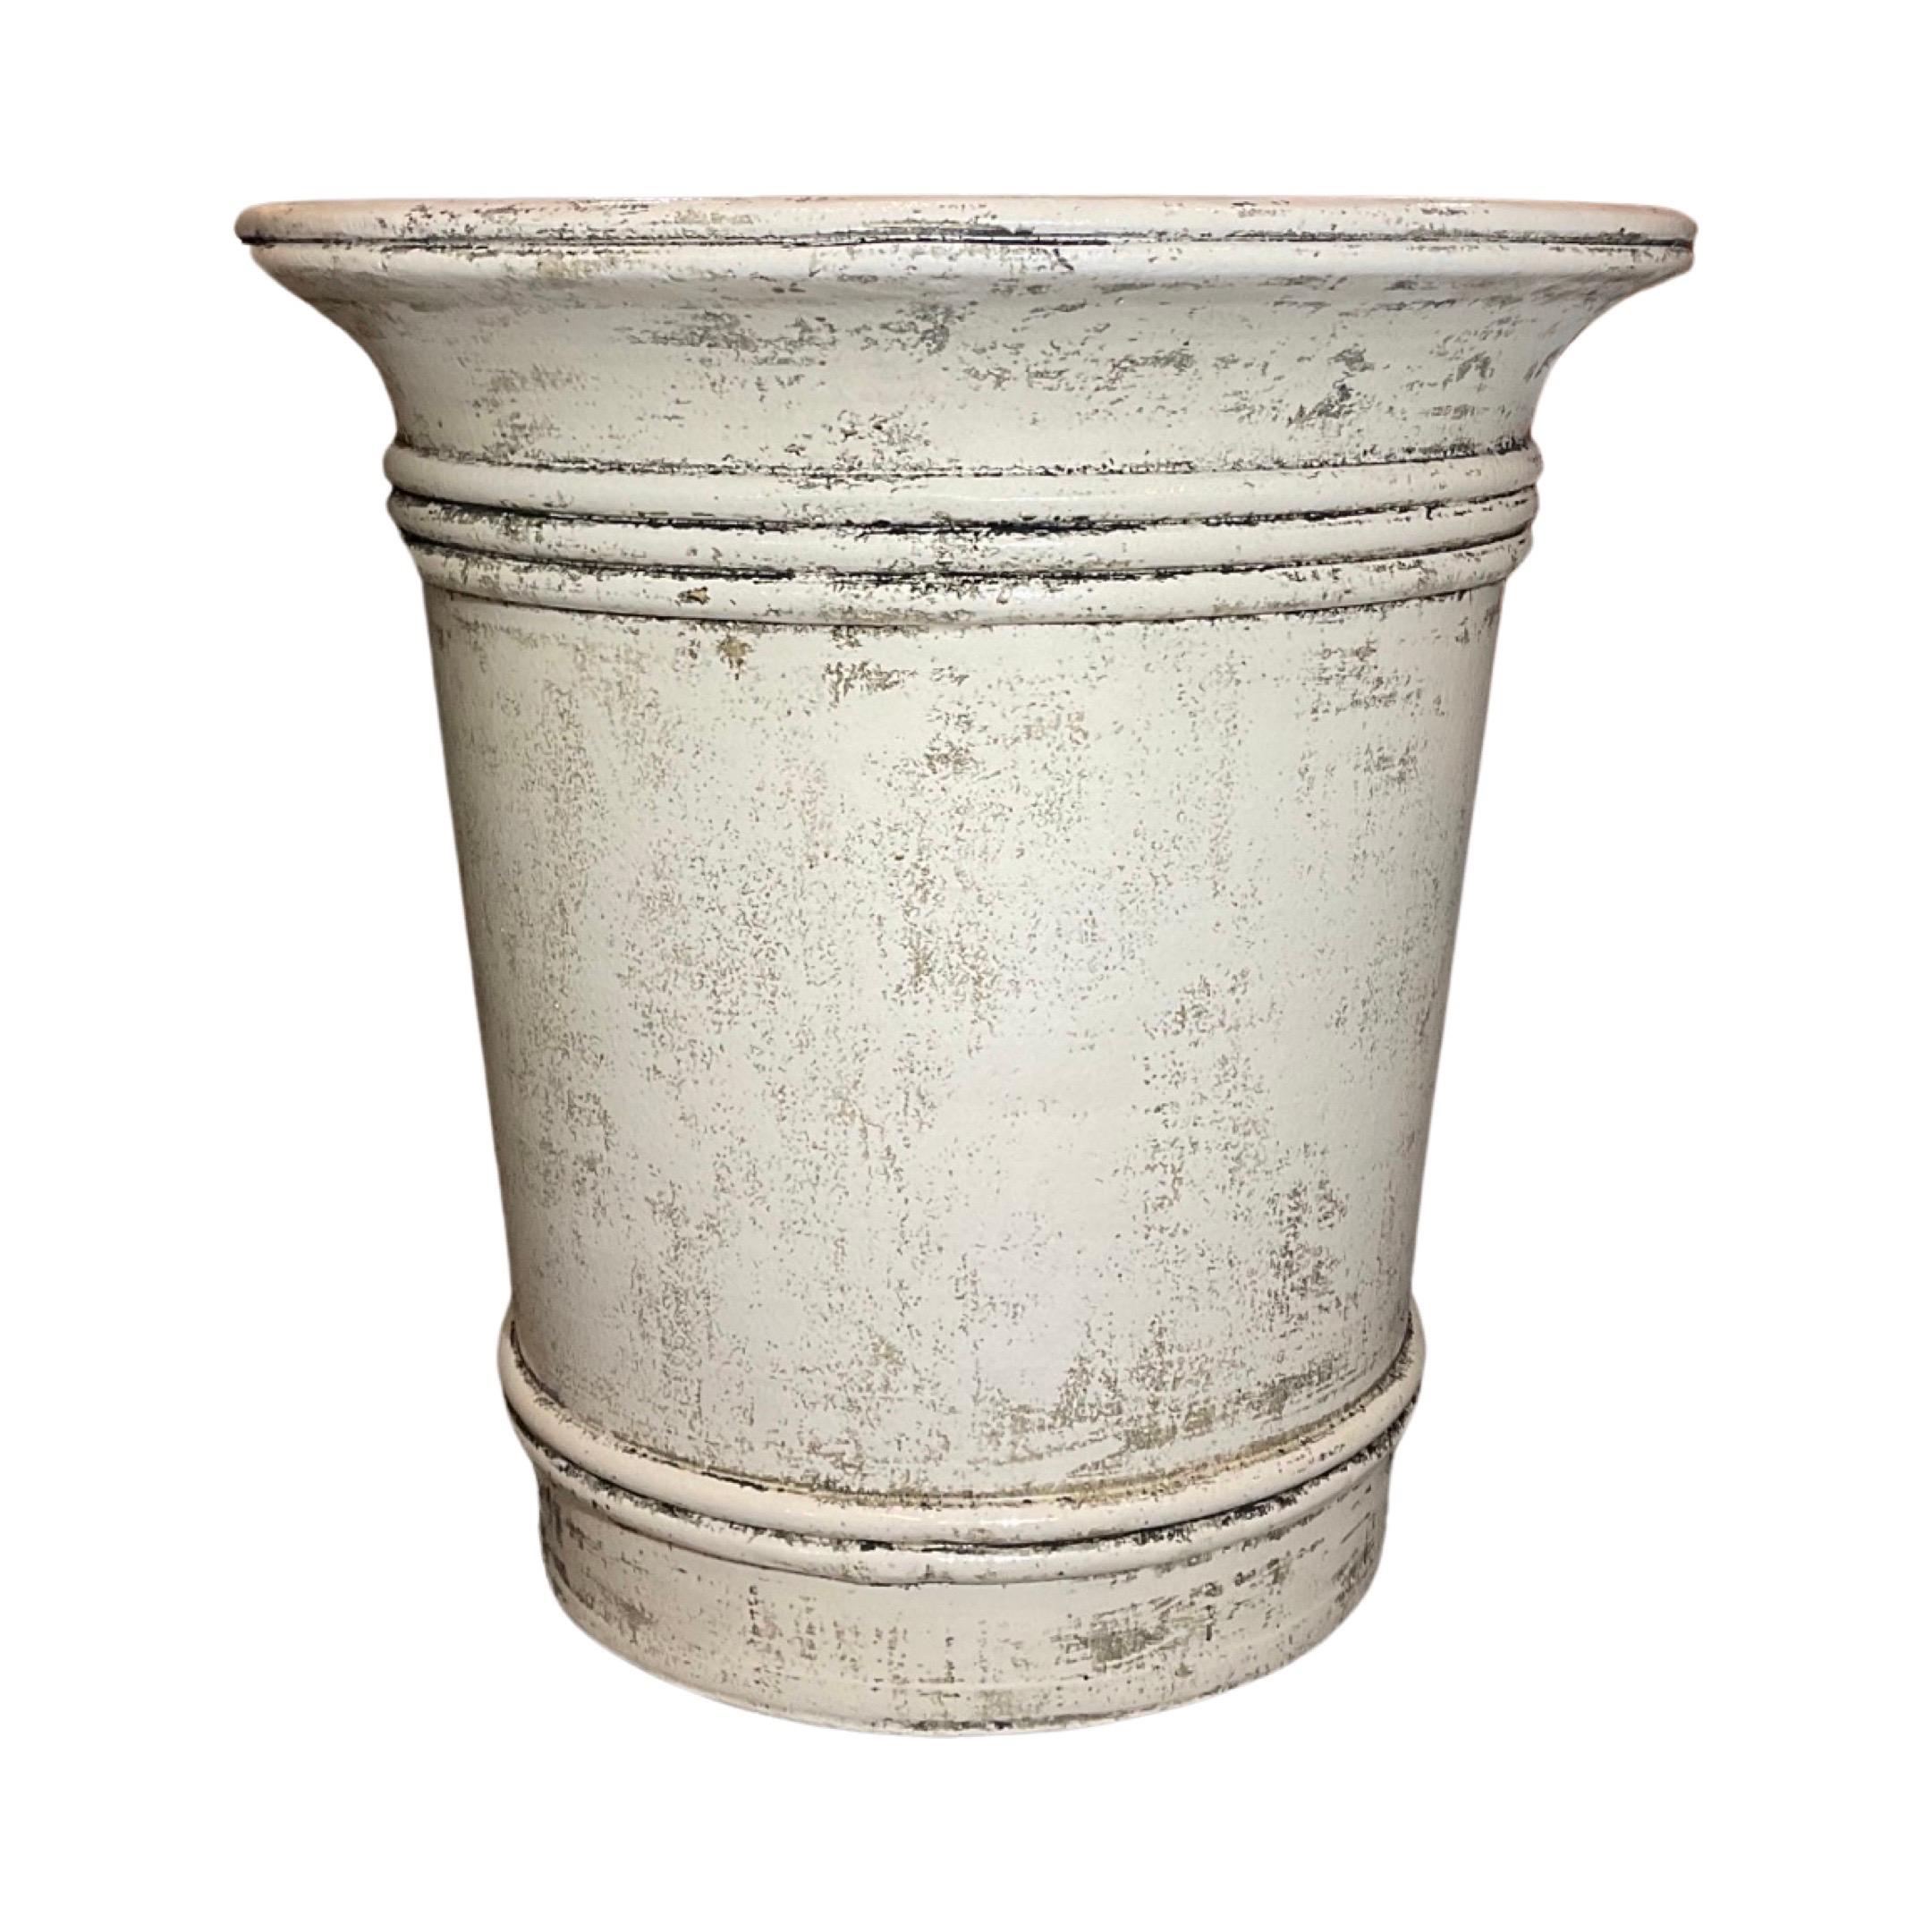 This anduze style French planter is from the 1940s and features an off white cream glaze finish with aged character wear. Hand-signed and sealed, this is an authentically elegant piece perfect for any garden. 